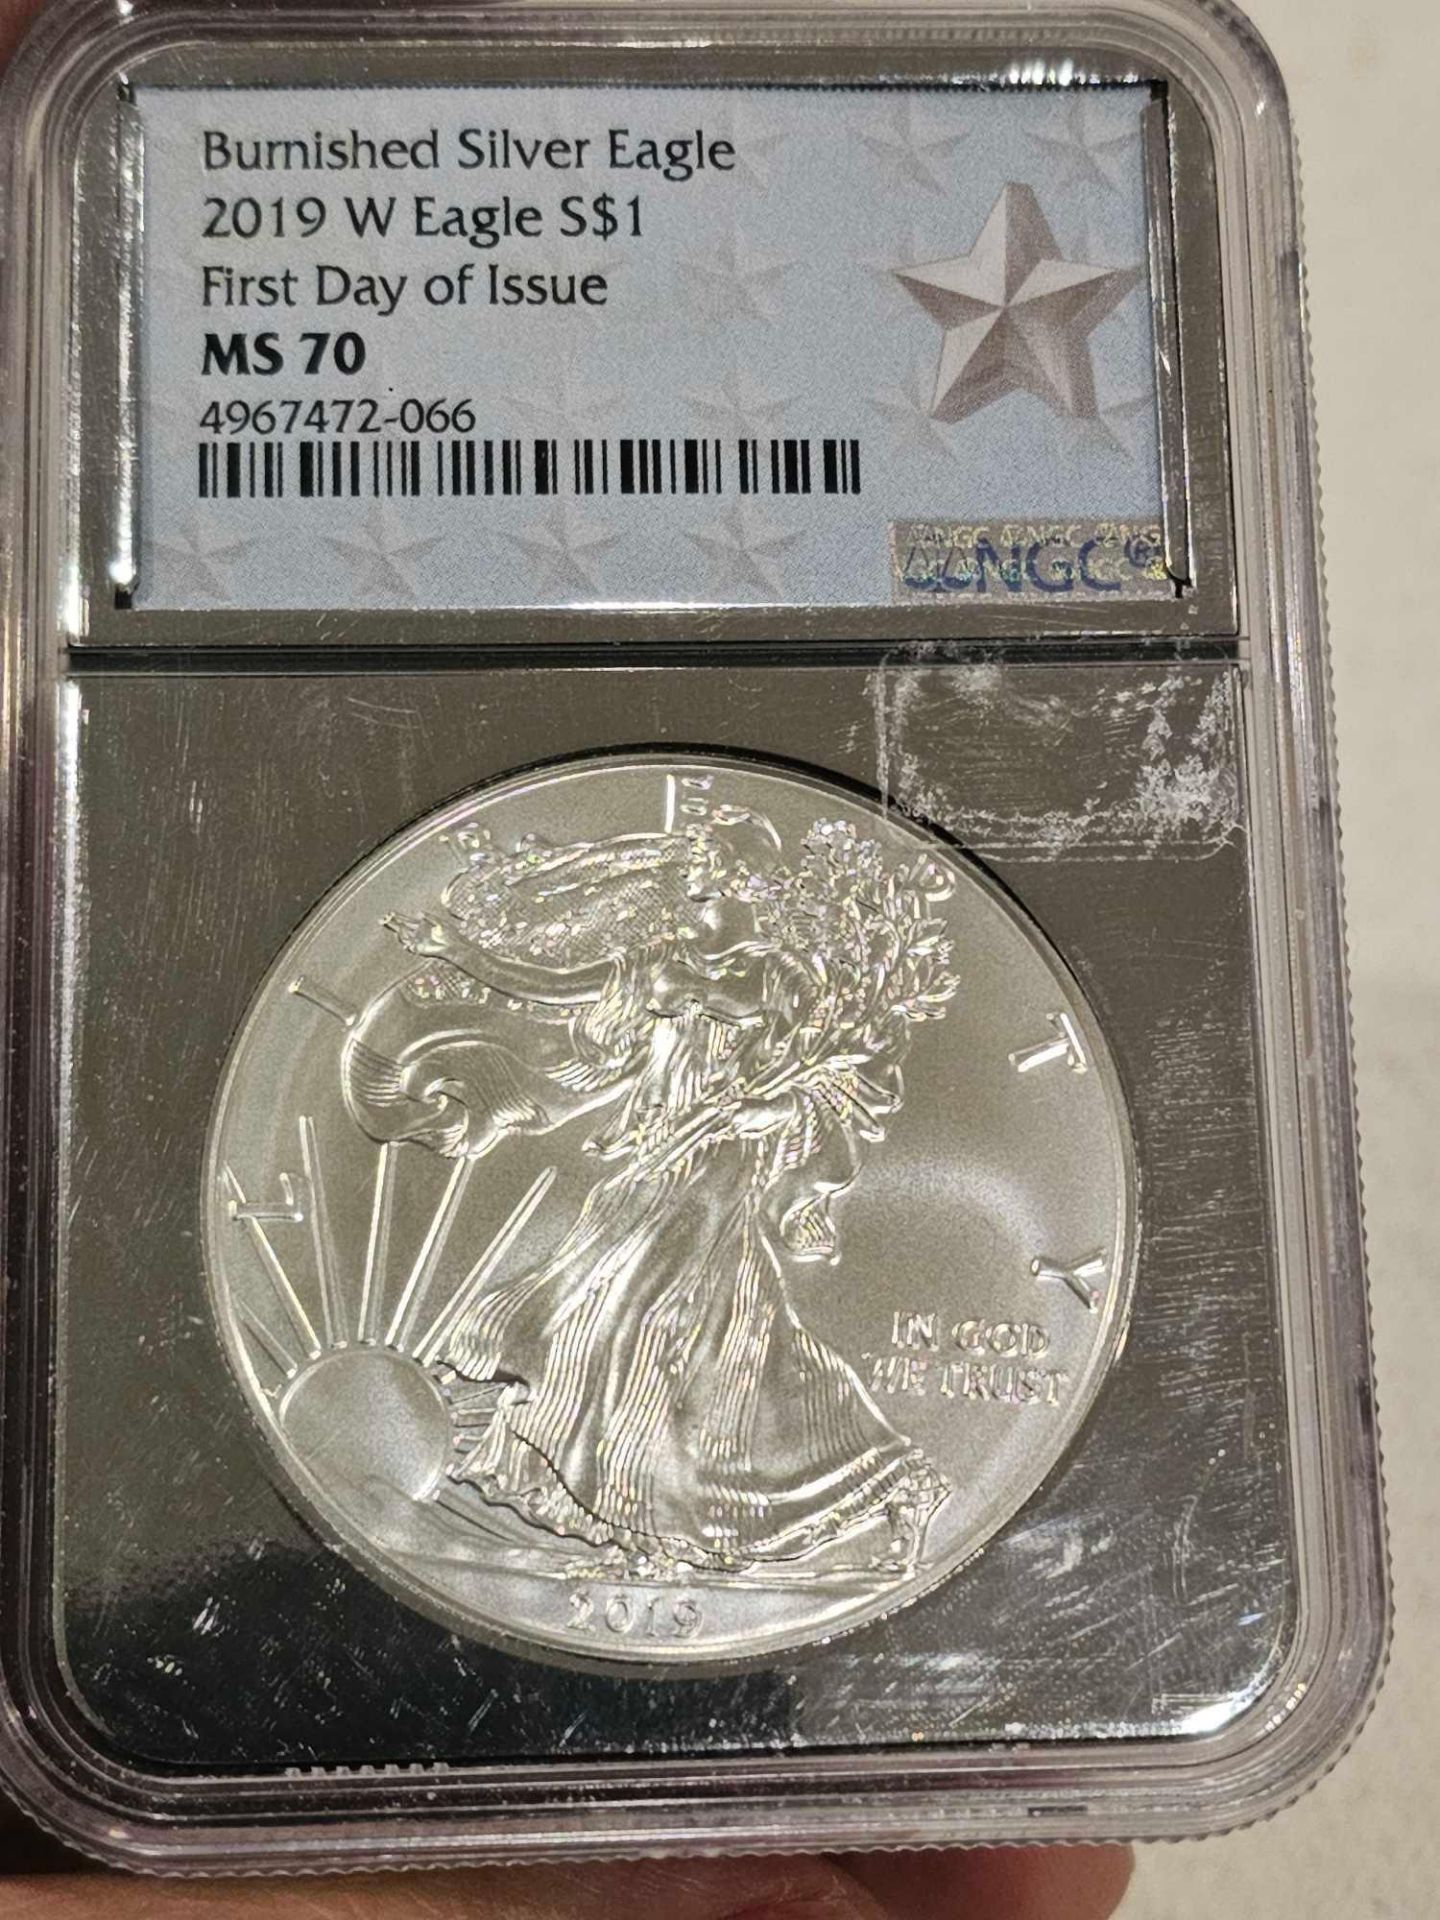 Burnished Silver Eagle 2019 W Early Release MS70